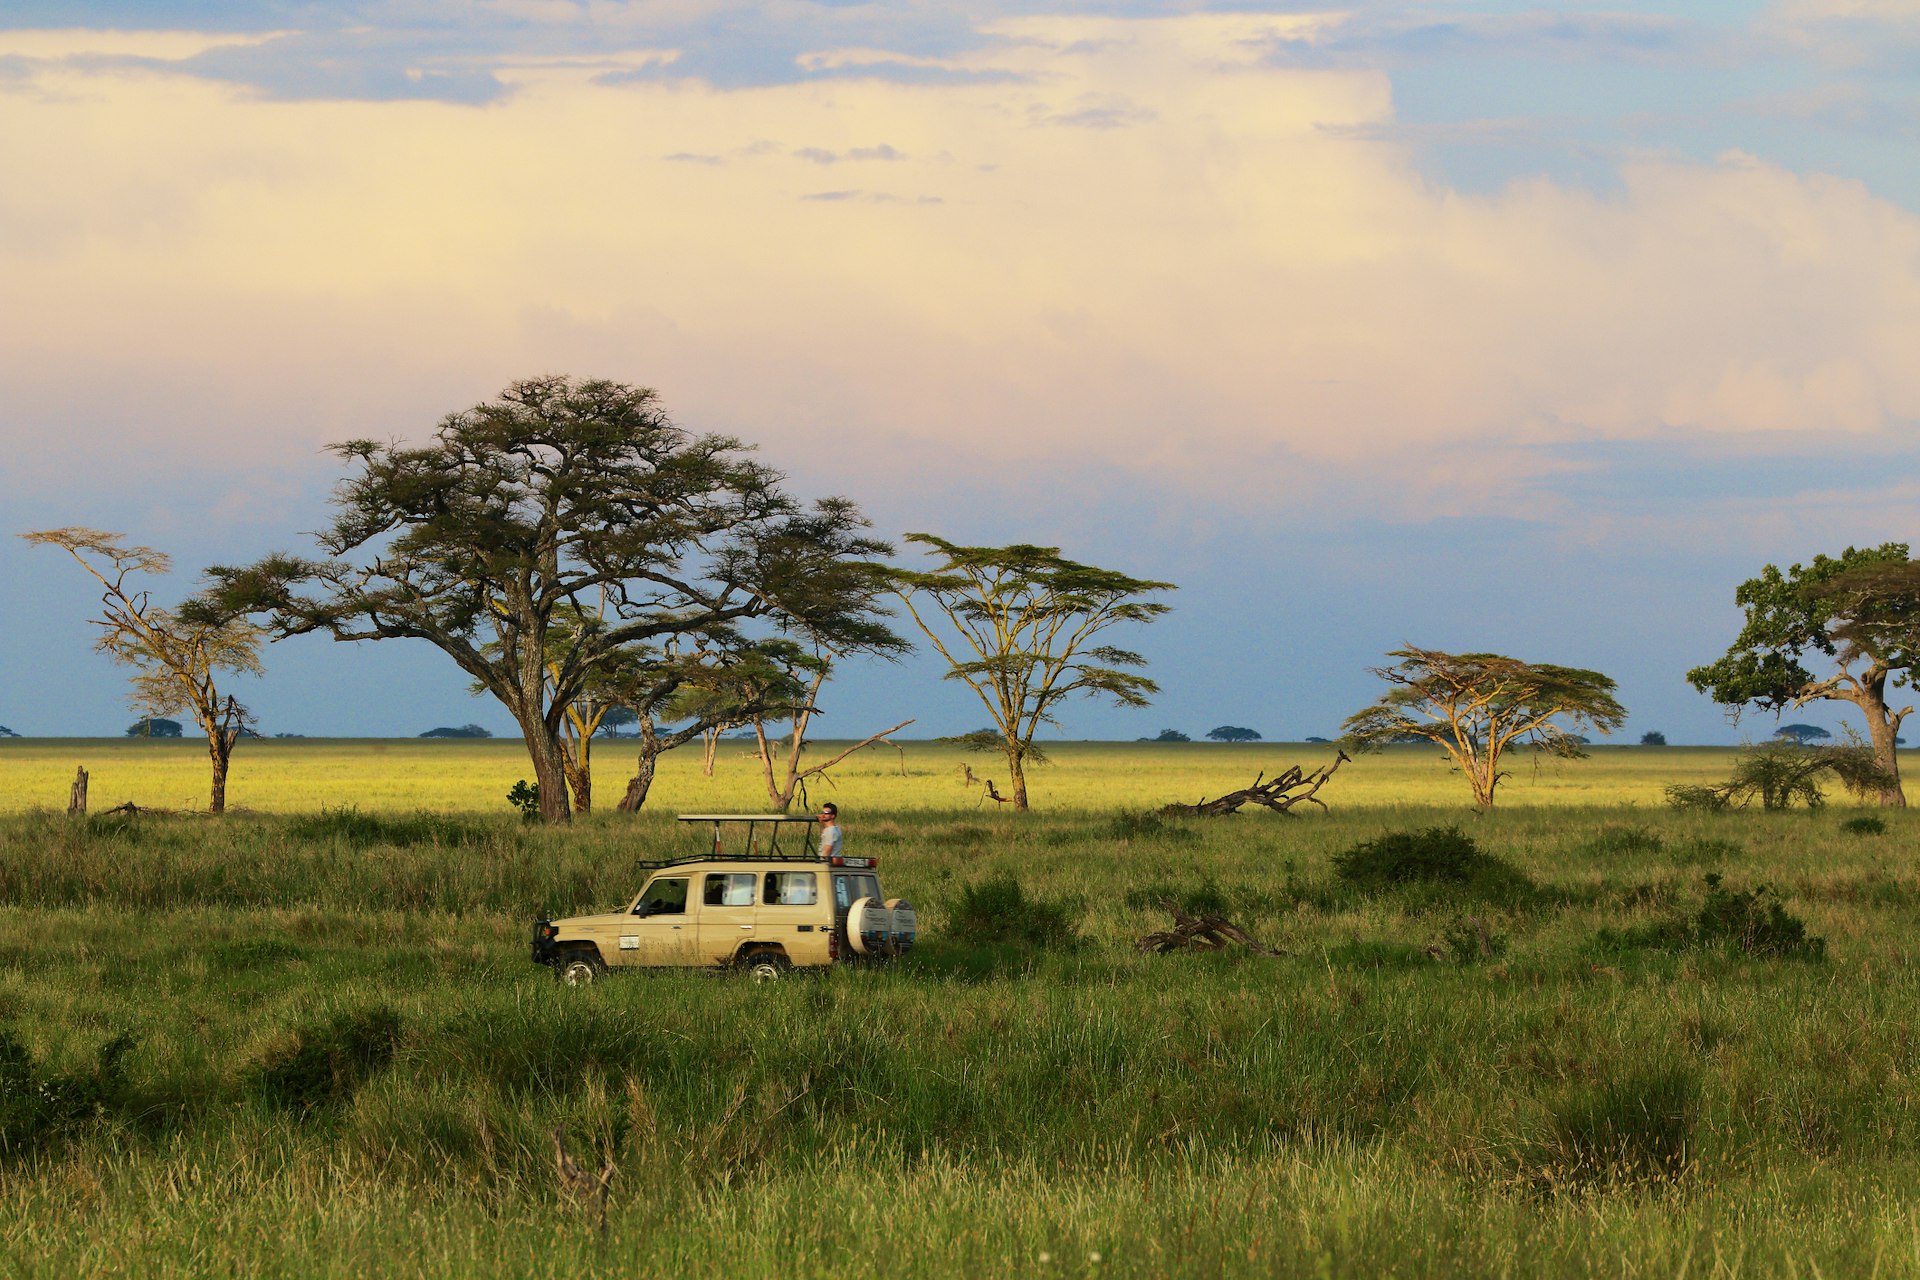 A solo figure stands on a safari truck looking out over the plains